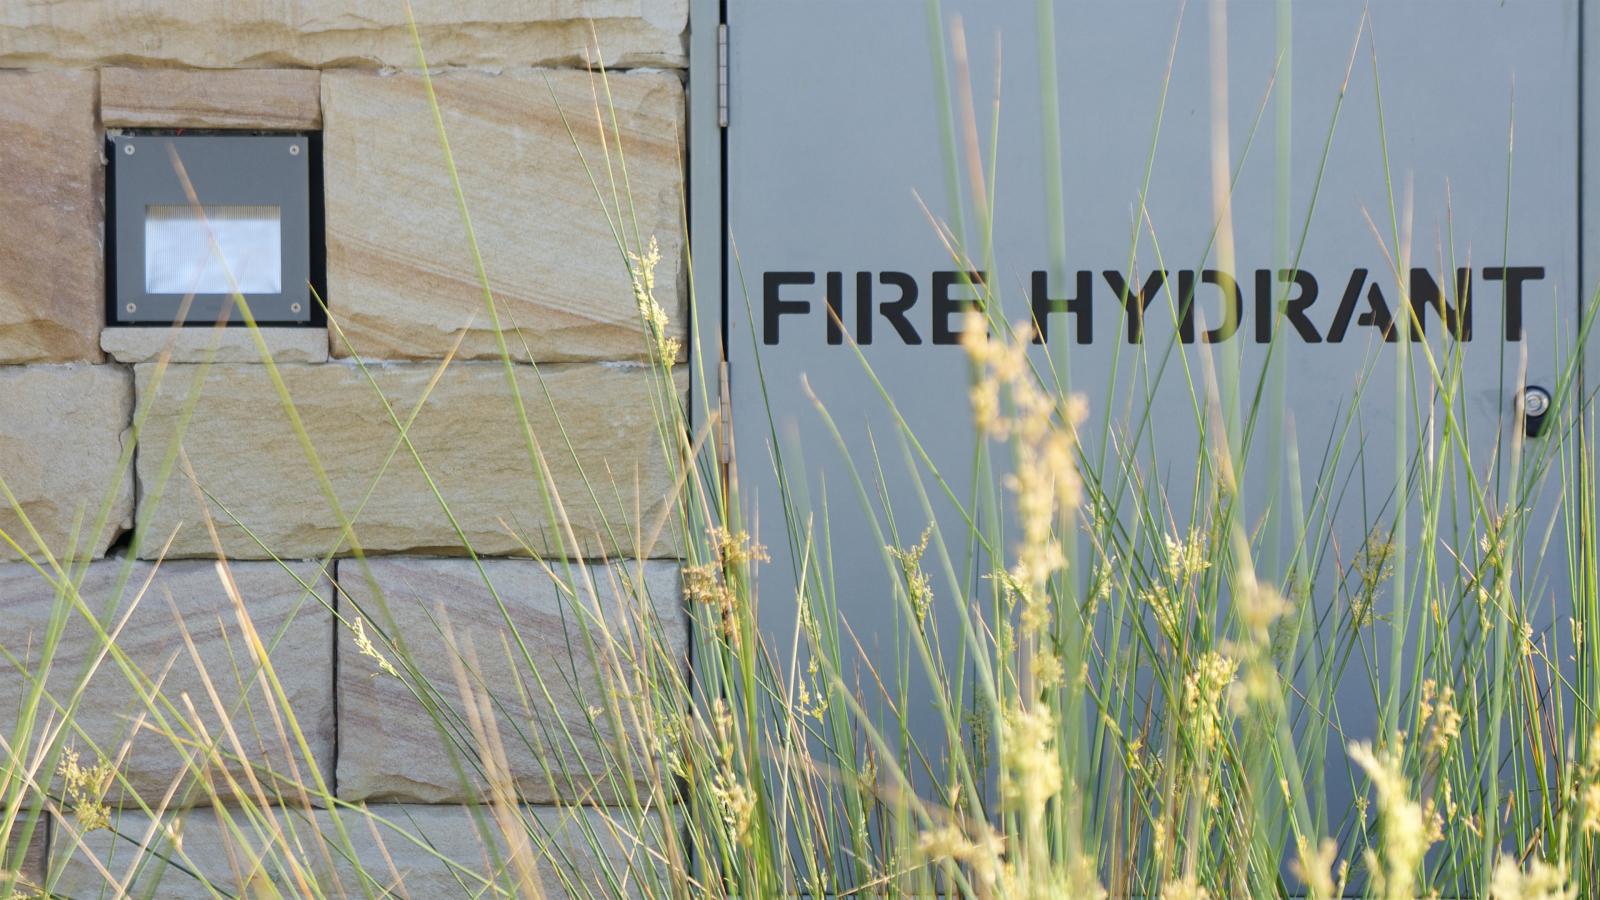 A gray fire hydrant door is positioned next to a tan stone wall along Spring Cove. Tall grasses grow in the foreground, partially obscuring the door and wall. A small framed sign is attached to the wall just above some of the grasses, evoking a sense of abiding nature amidst urban manly surroundings.